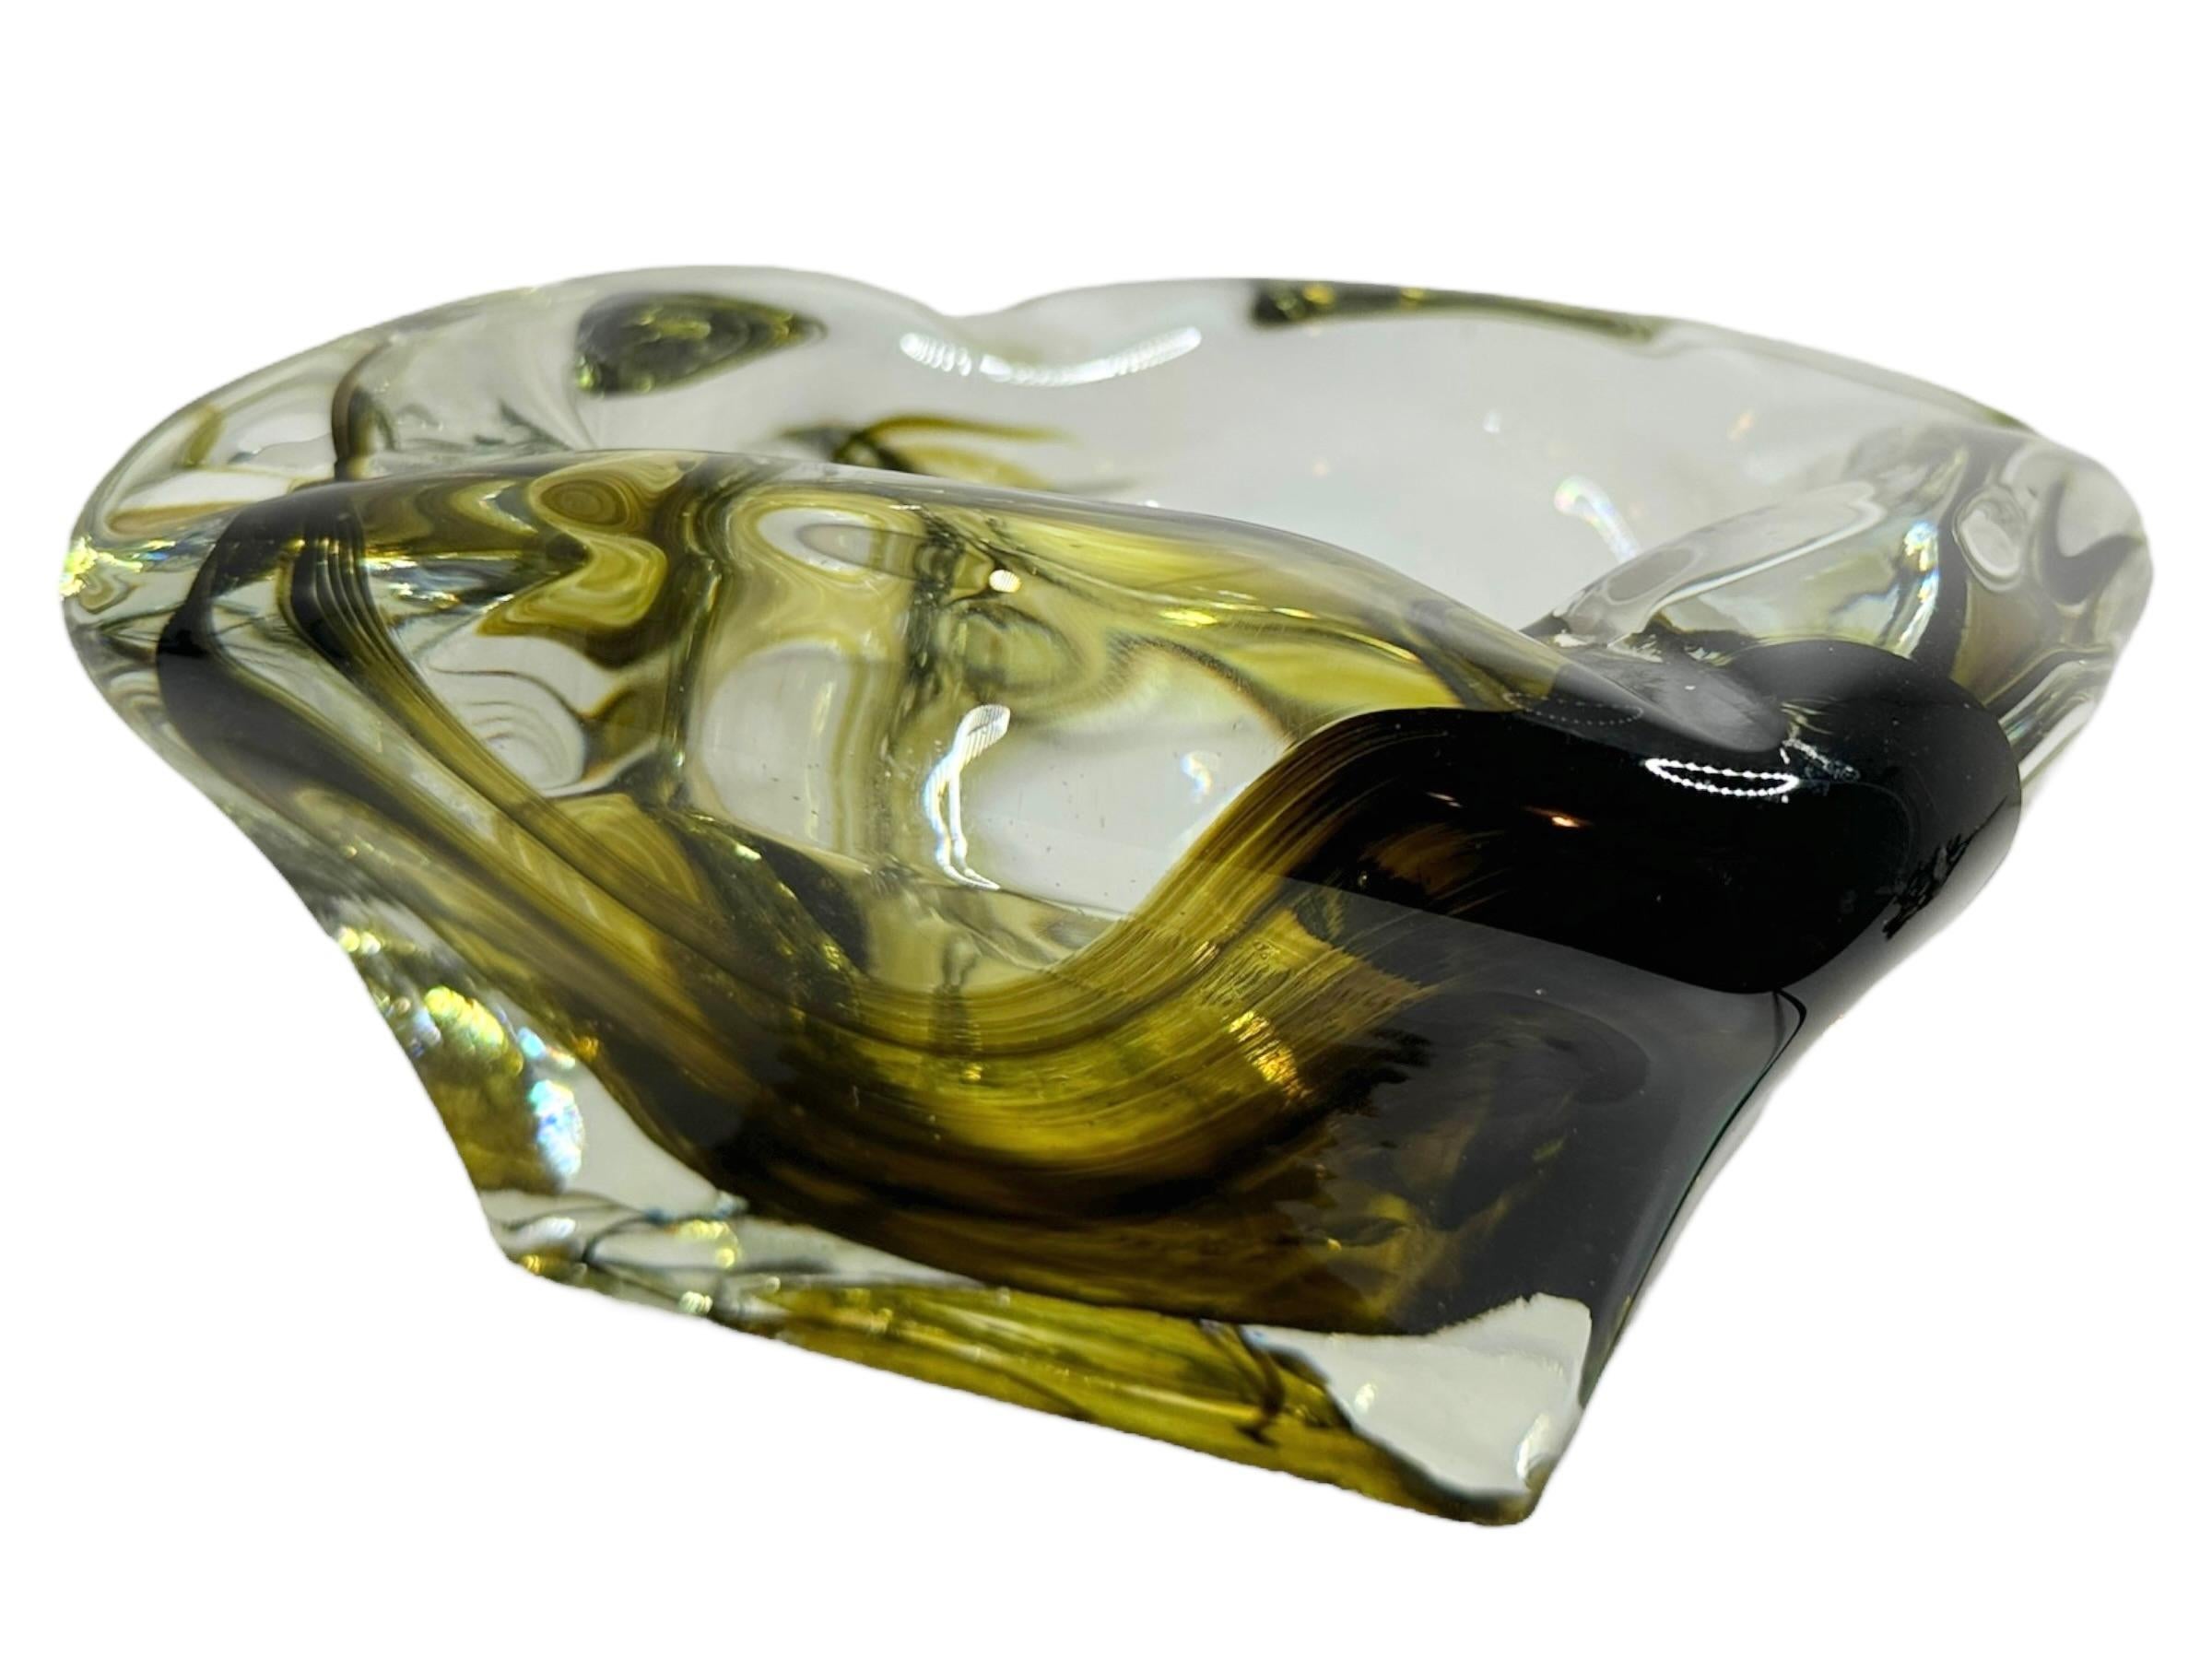 Gorgeous large heavy hand blown Murano art glass piece. A beautiful brutalist and organic ashtray, Venice, Murano, Italy, 1970s. Found at an estate sale in Modena, Italy. Nice addition to any room. 